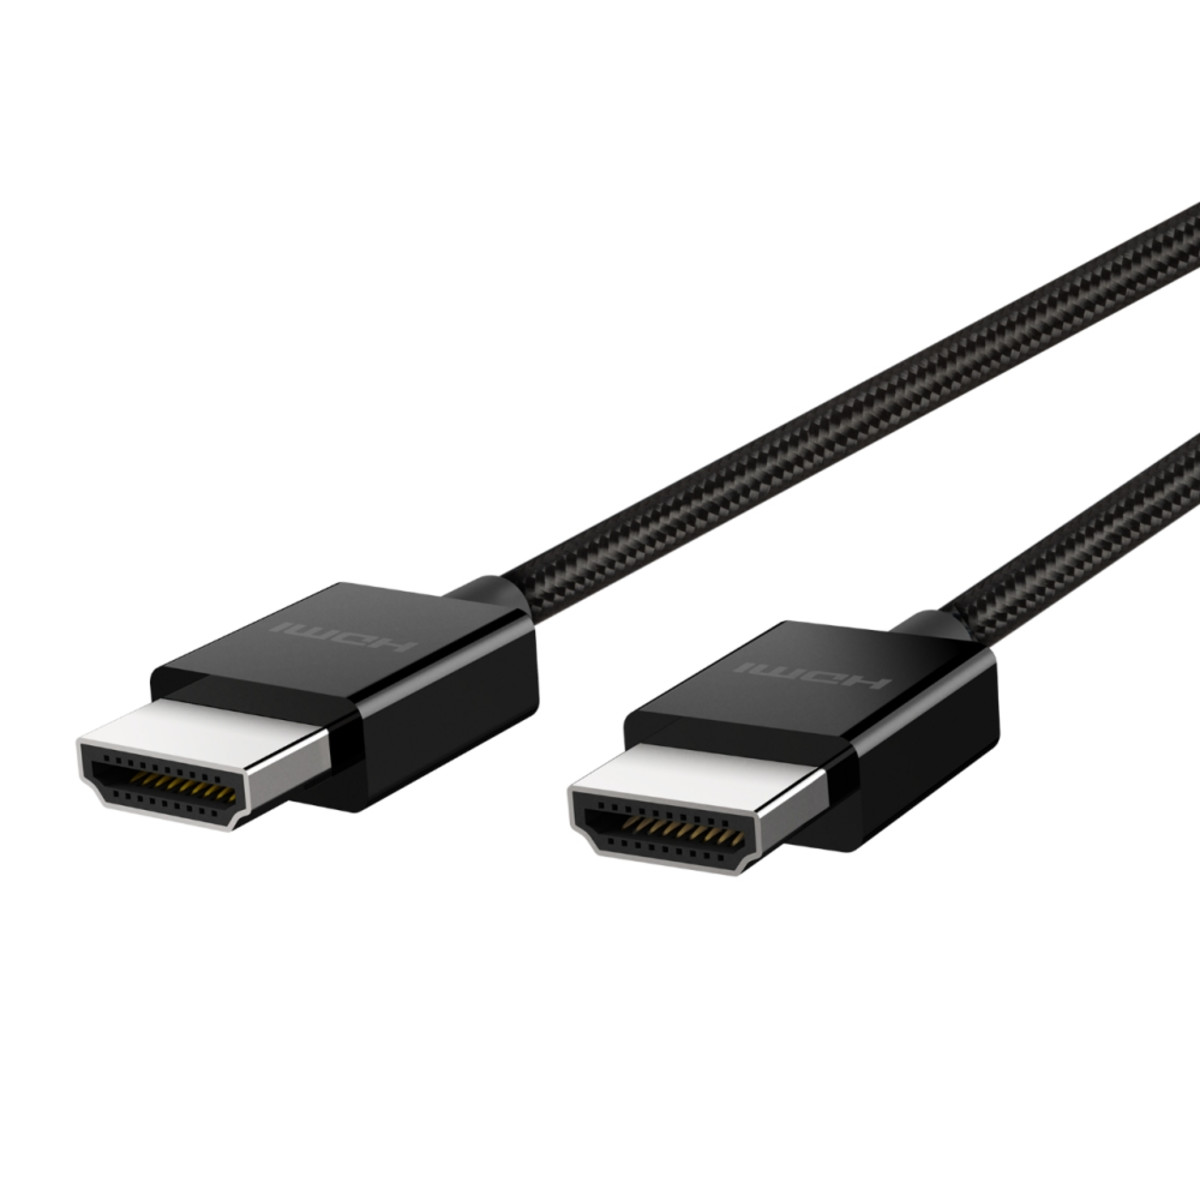 Ultra High Speed HDMI Cable 2m - Black